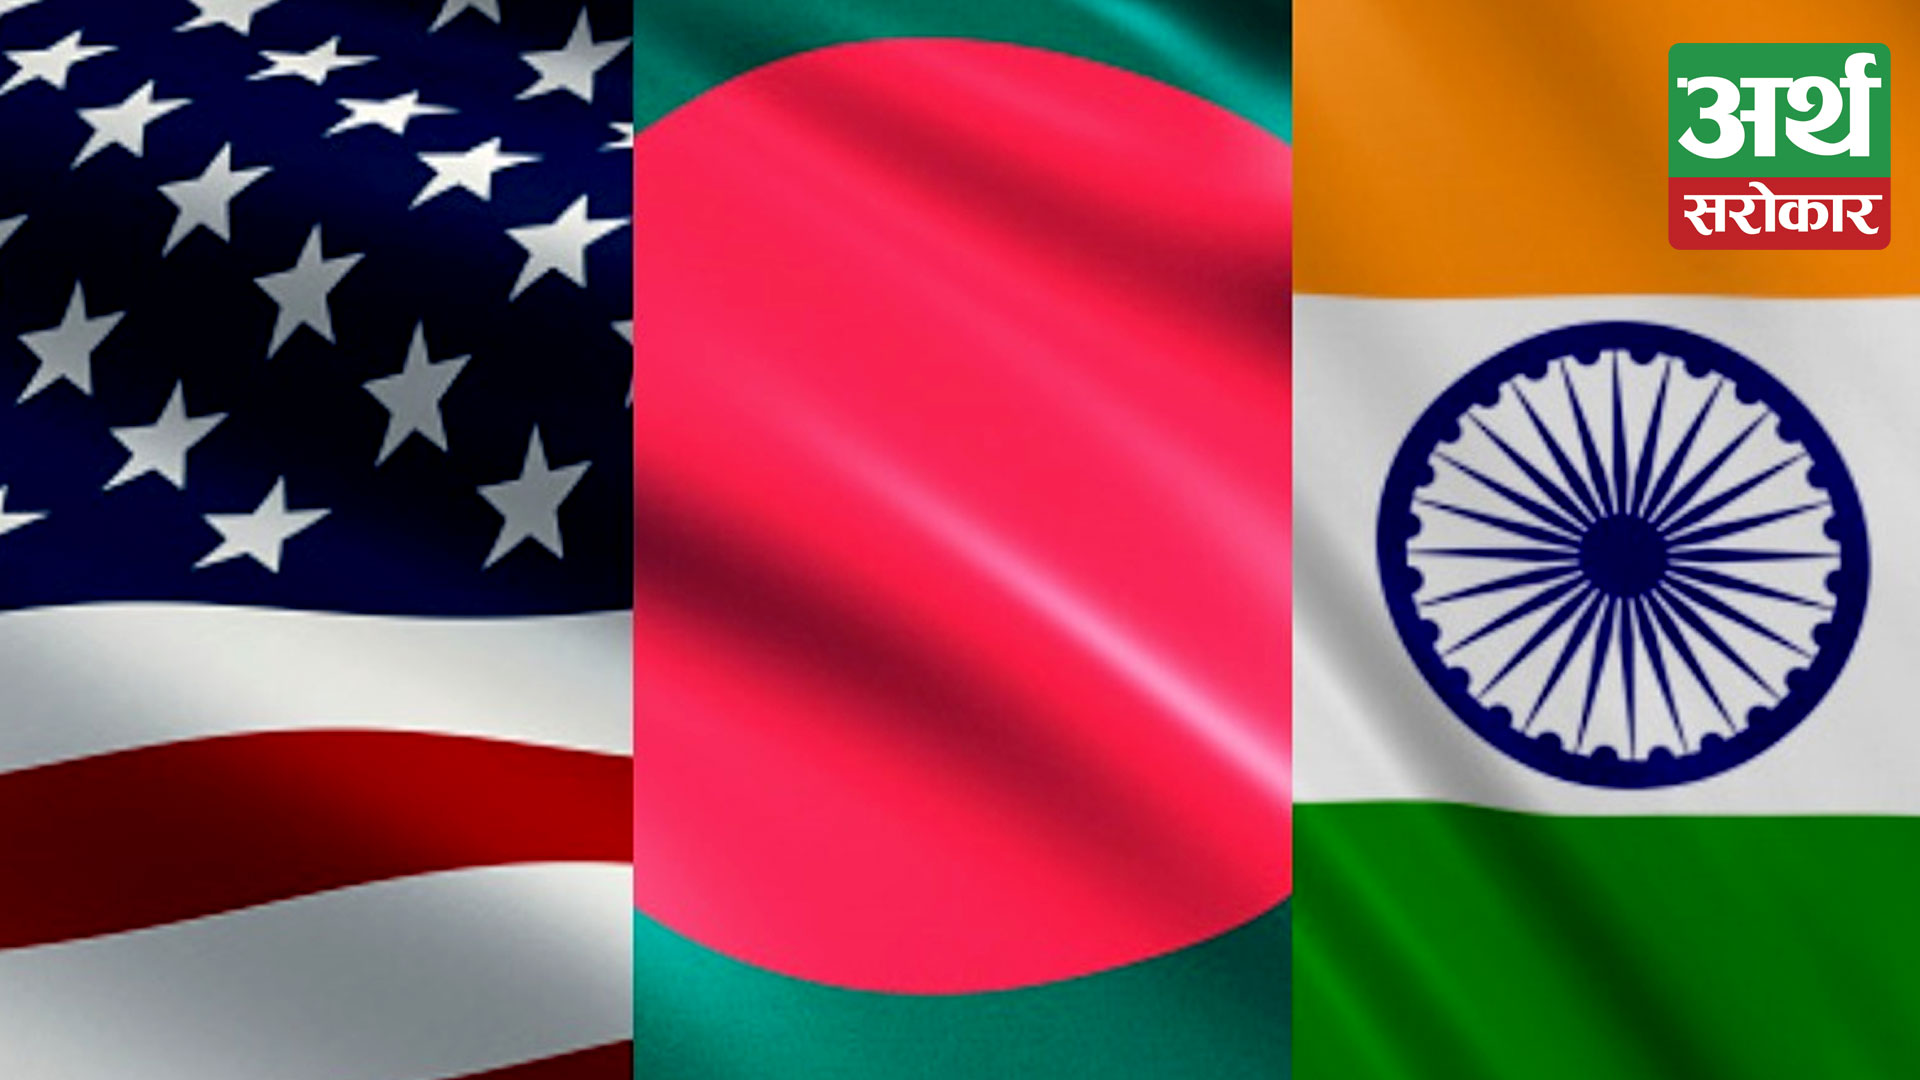 In order to further its own interests, India must stand with Bangladesh regarding US-Bangladesh issue?